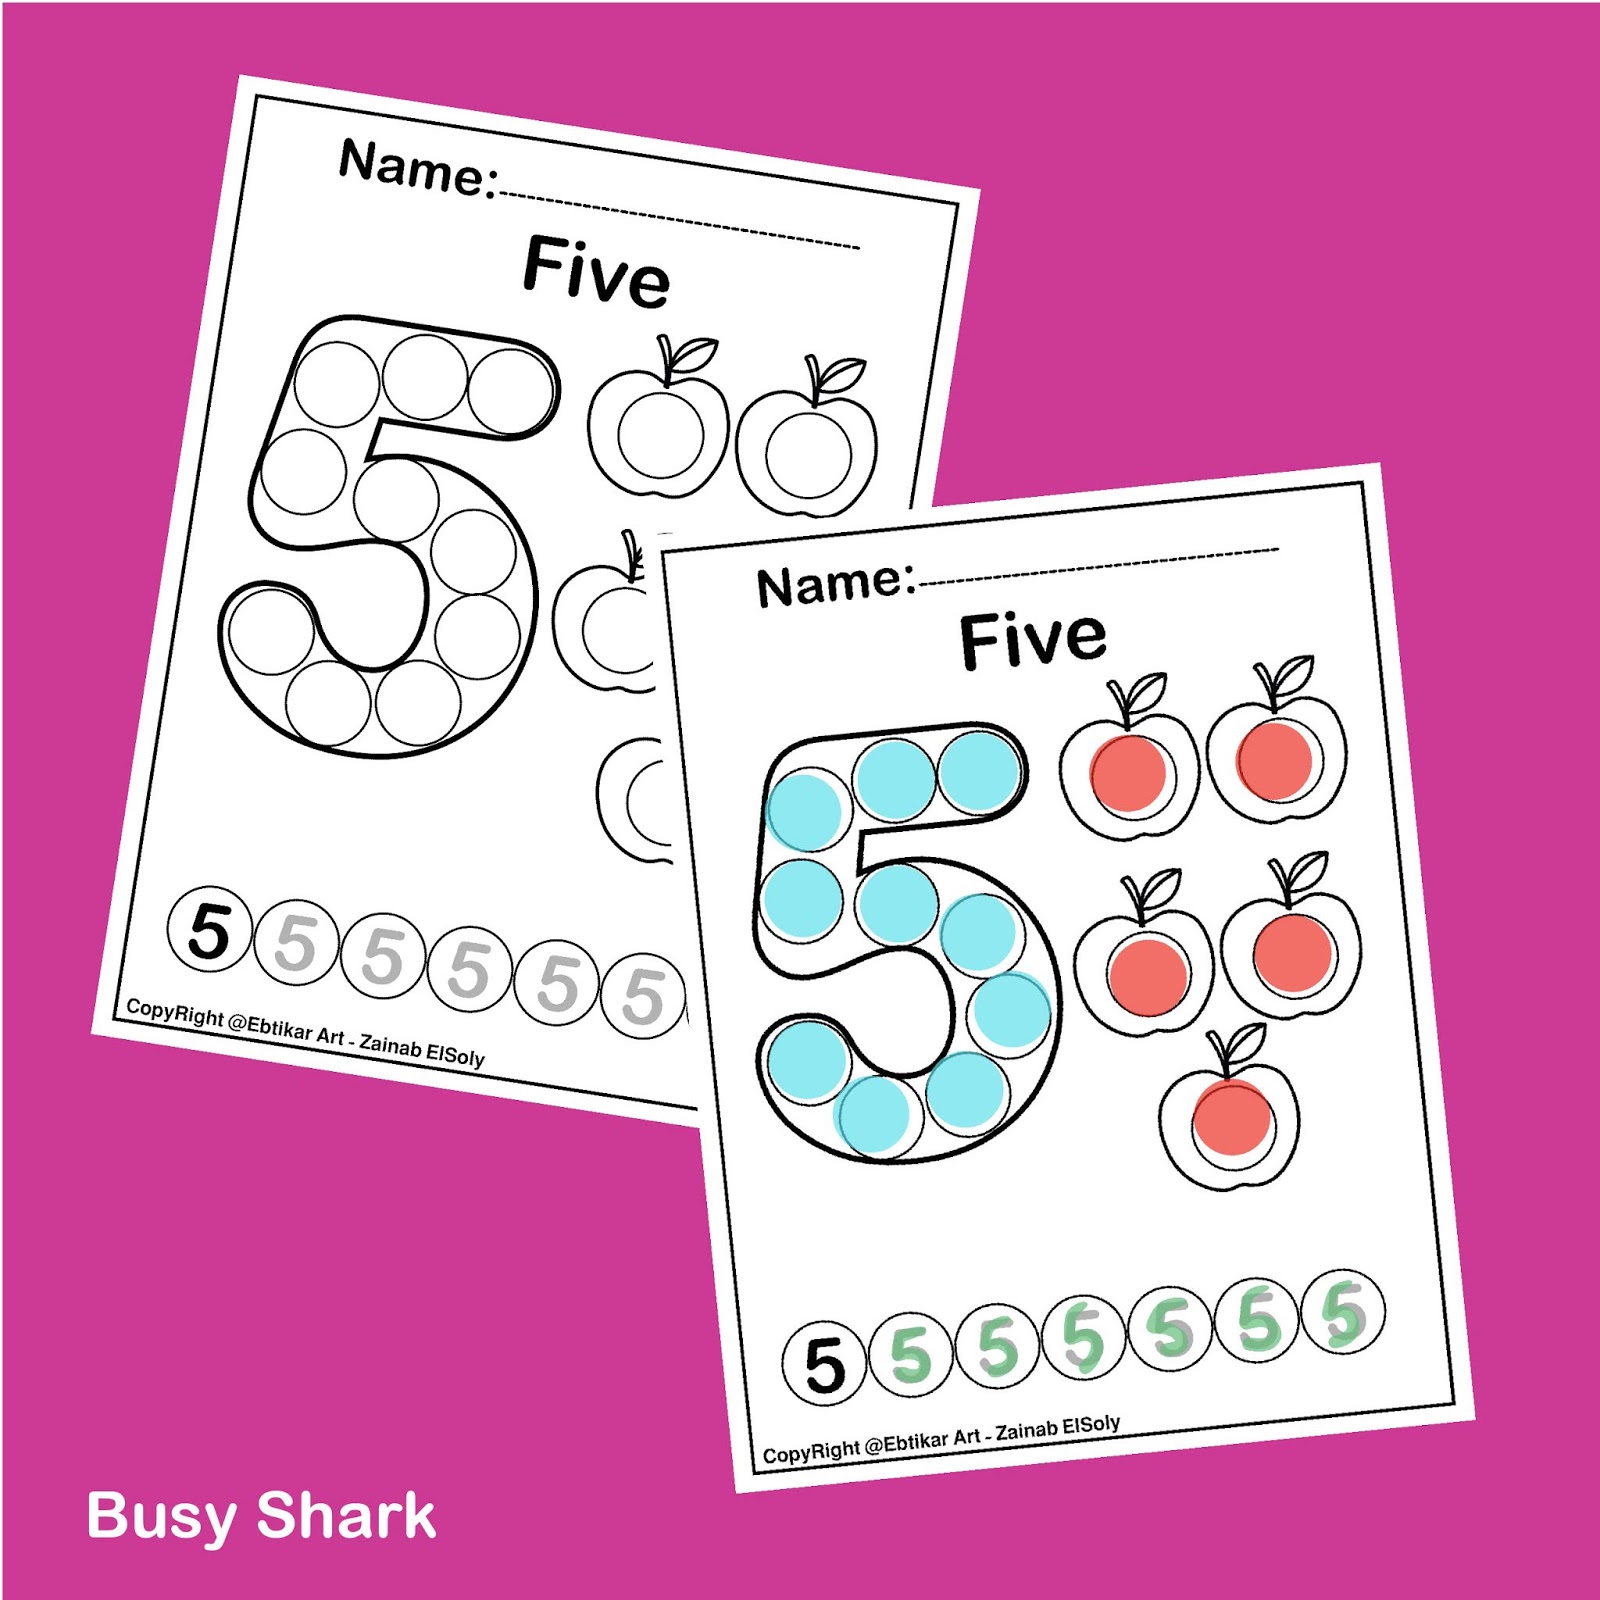 Shapes, Numbers and Fruits Dot Marker Activity Book : Dot Markers Activity  Book: Shapes, Numbers and Fruits Easy Guided BIG DOTS Gift for Kids Ages 1-3,  2-4, 3-5, Baby, Toddler, Preschool